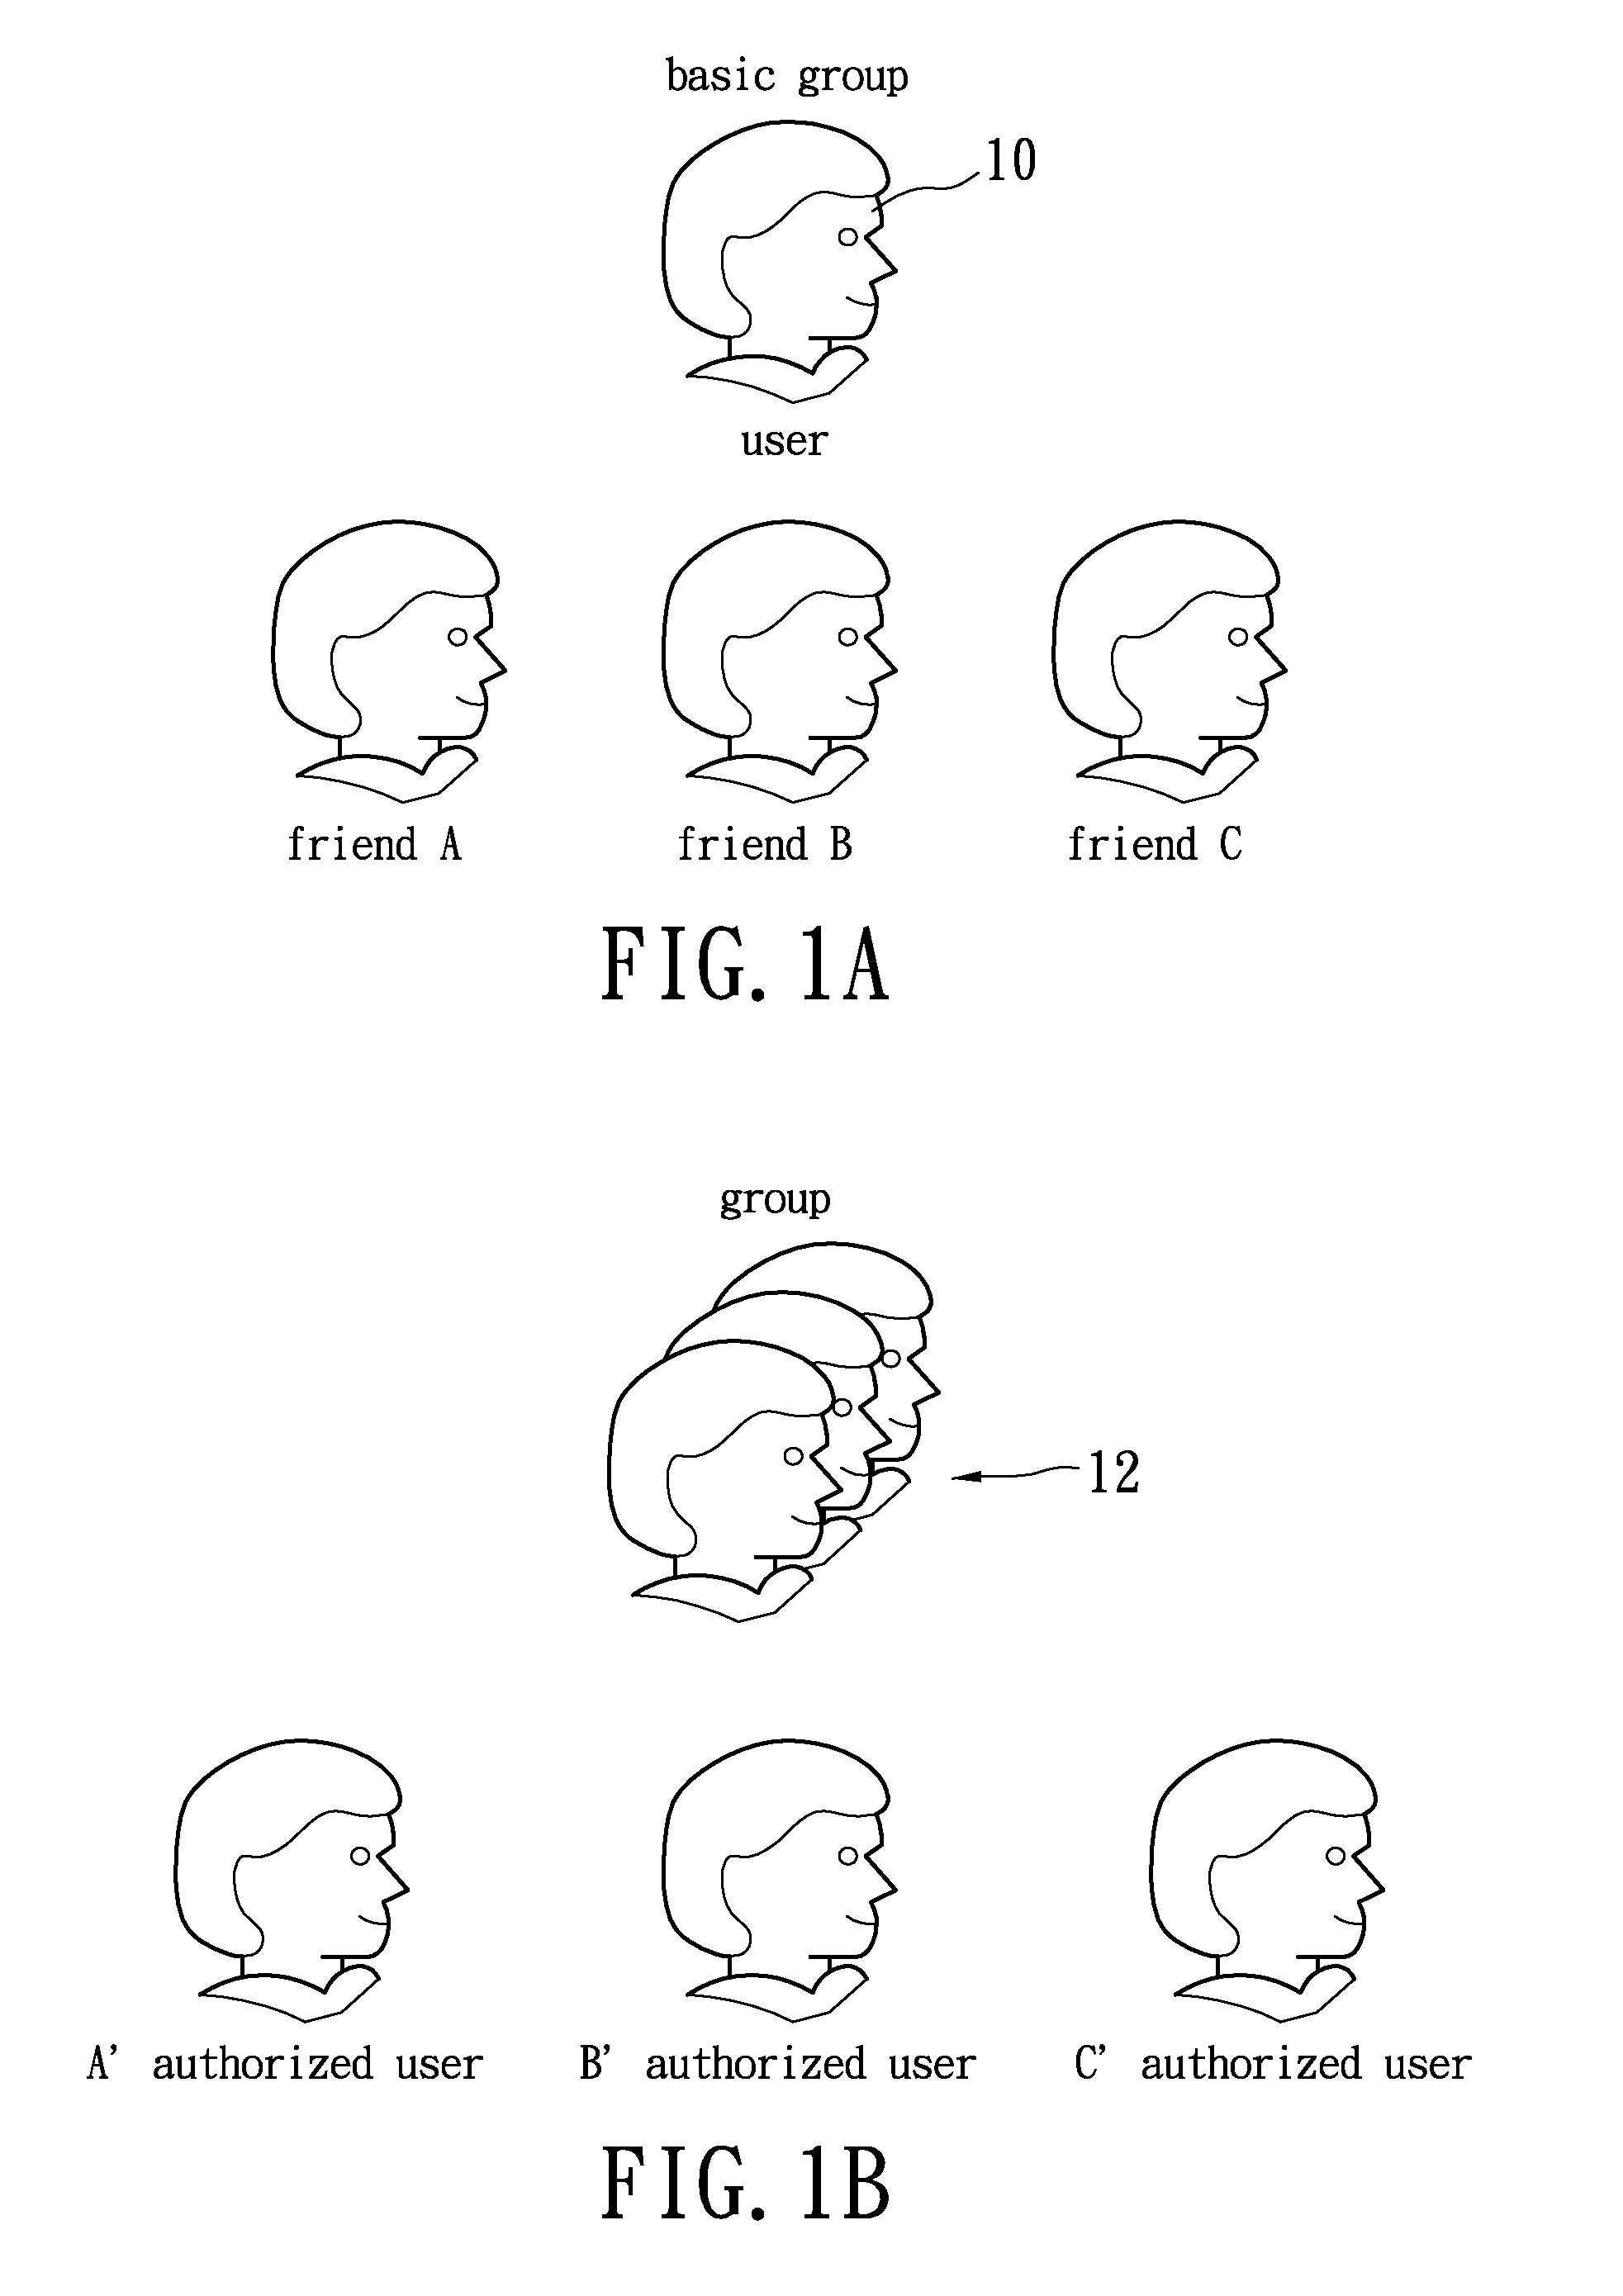 System and method for sharing network storage and computing resource